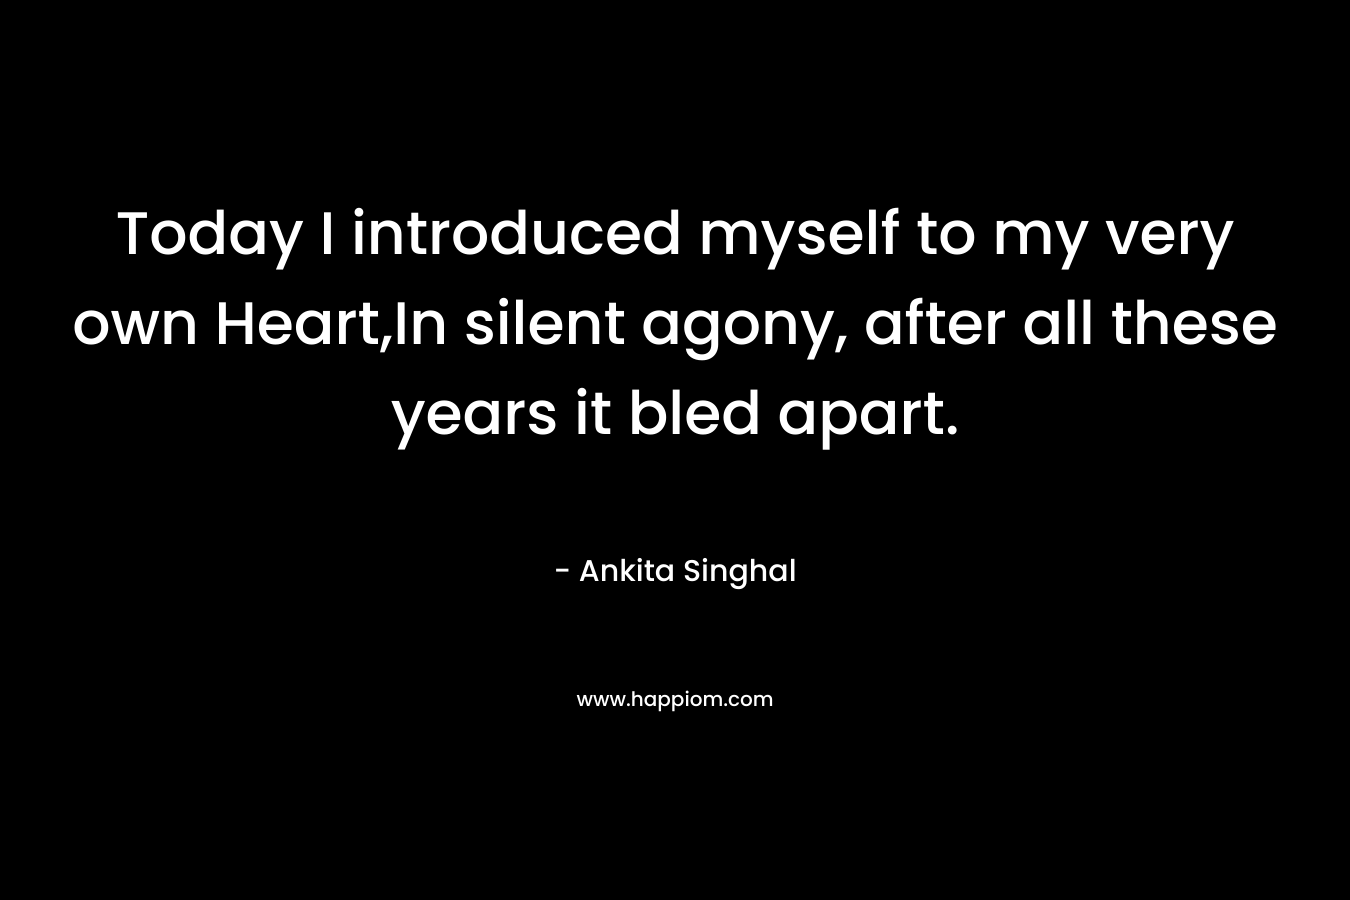 Today I introduced myself to my very own Heart,In silent agony, after all these years it bled apart.